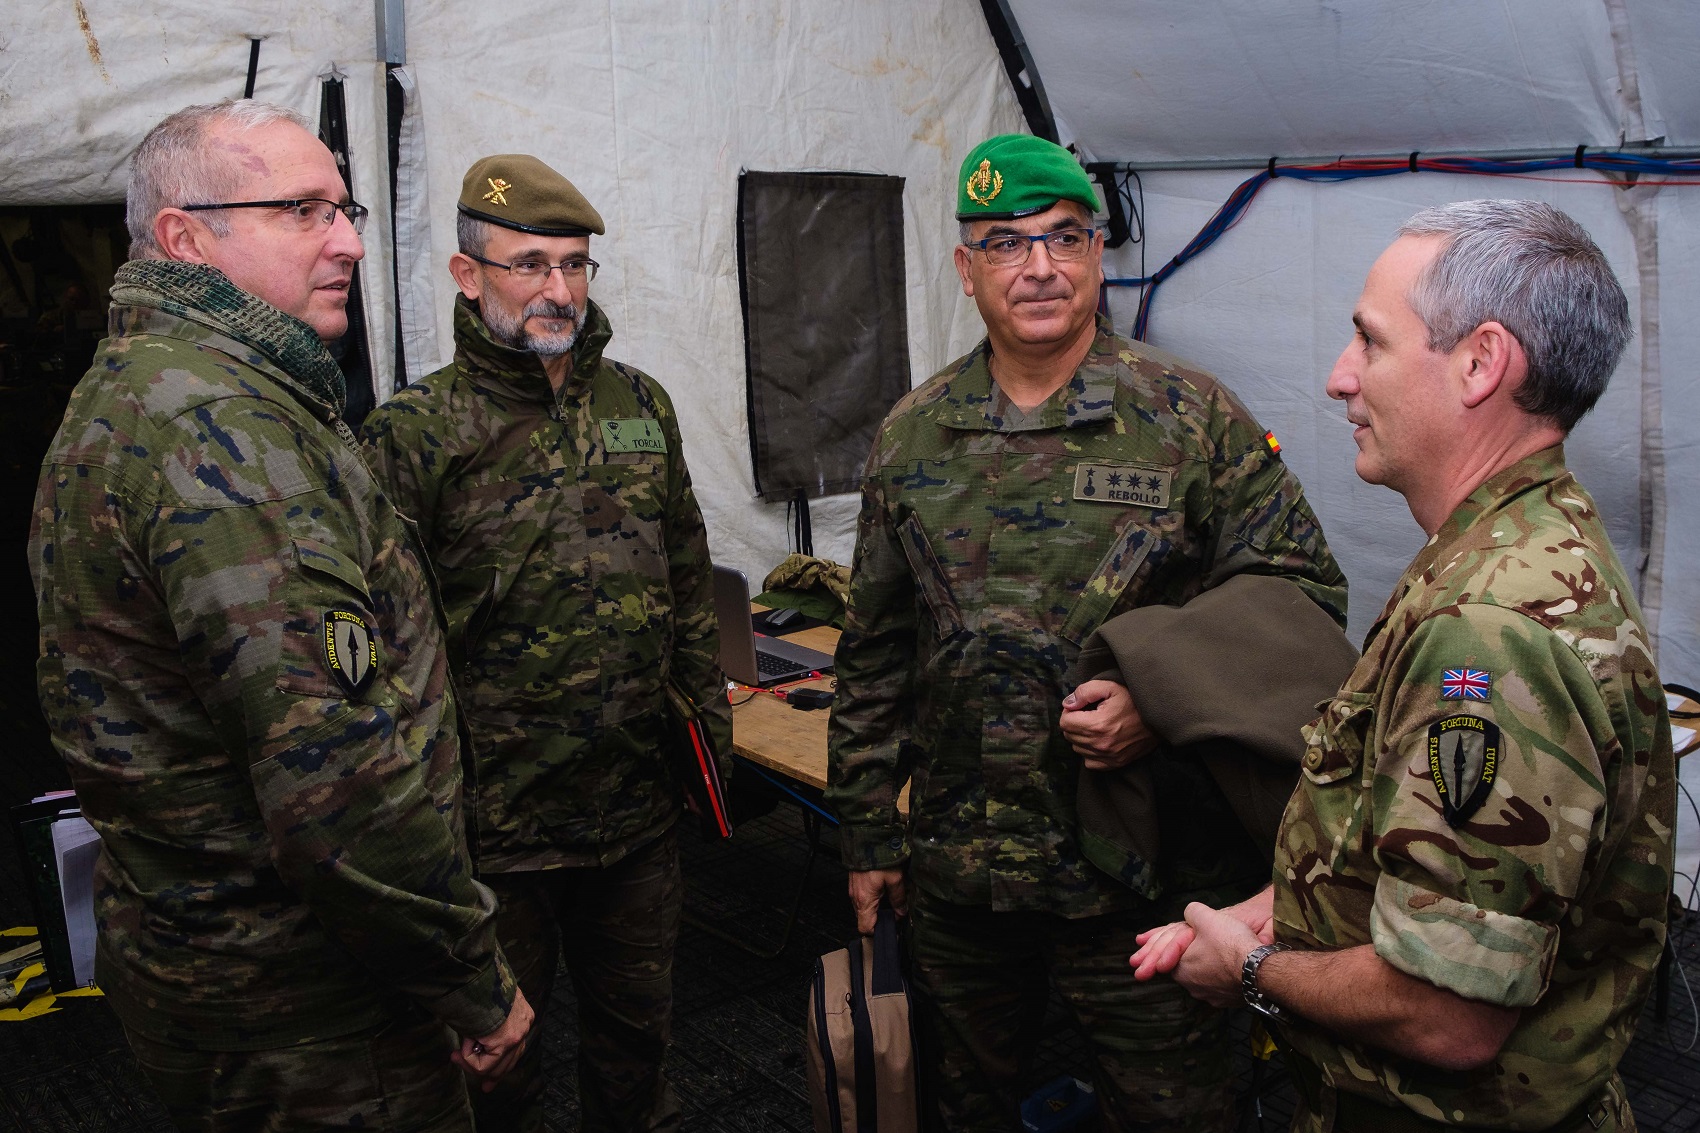 Spanish personnel take part in the exercise Arcade Fusion from the Allied Rapid Reaction Corps